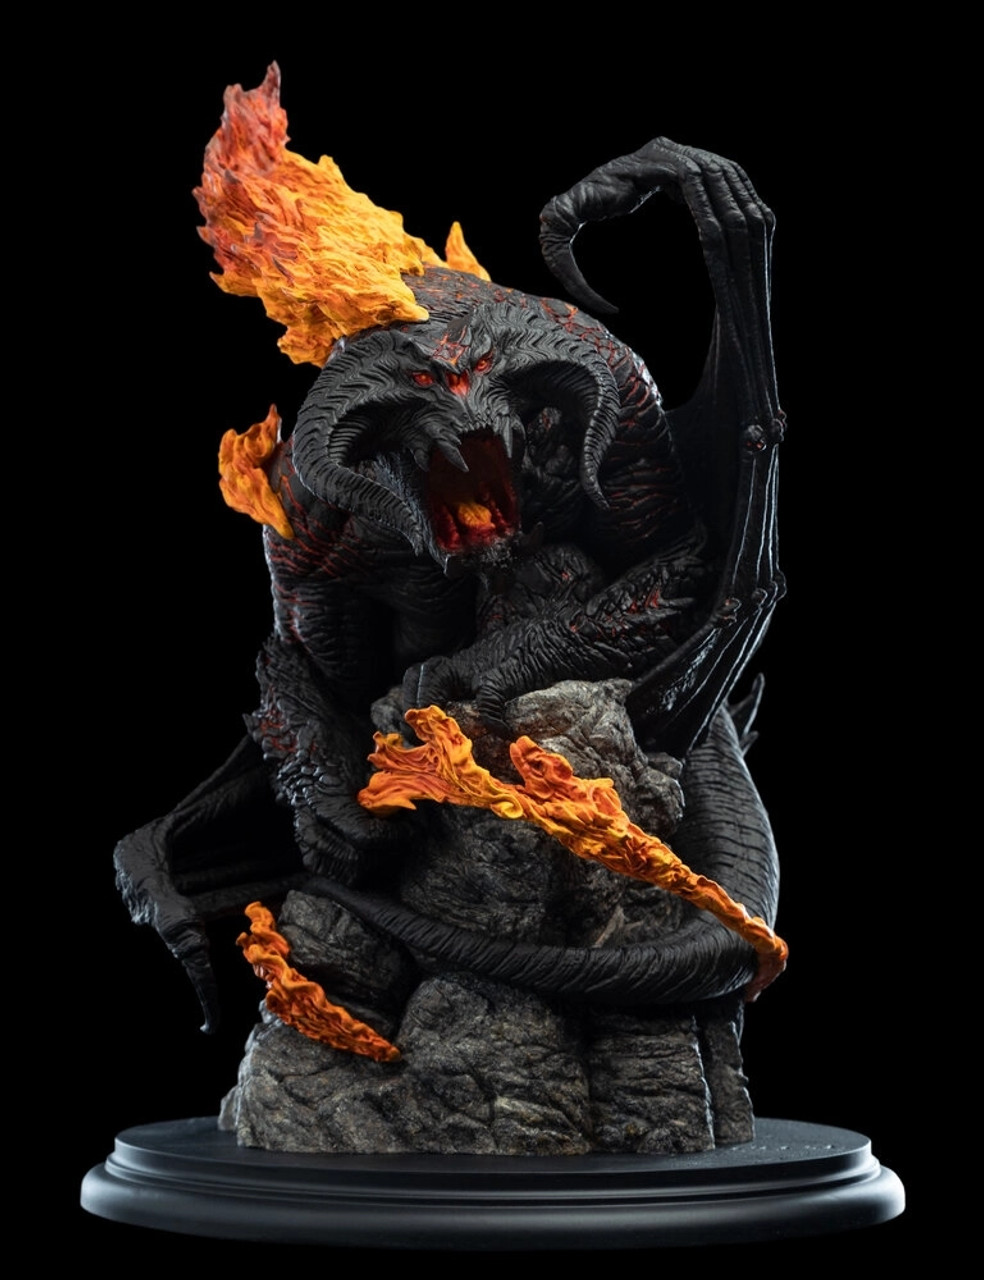 WETA LORD OF THE RINGS CLASSIC STATUE BALROG